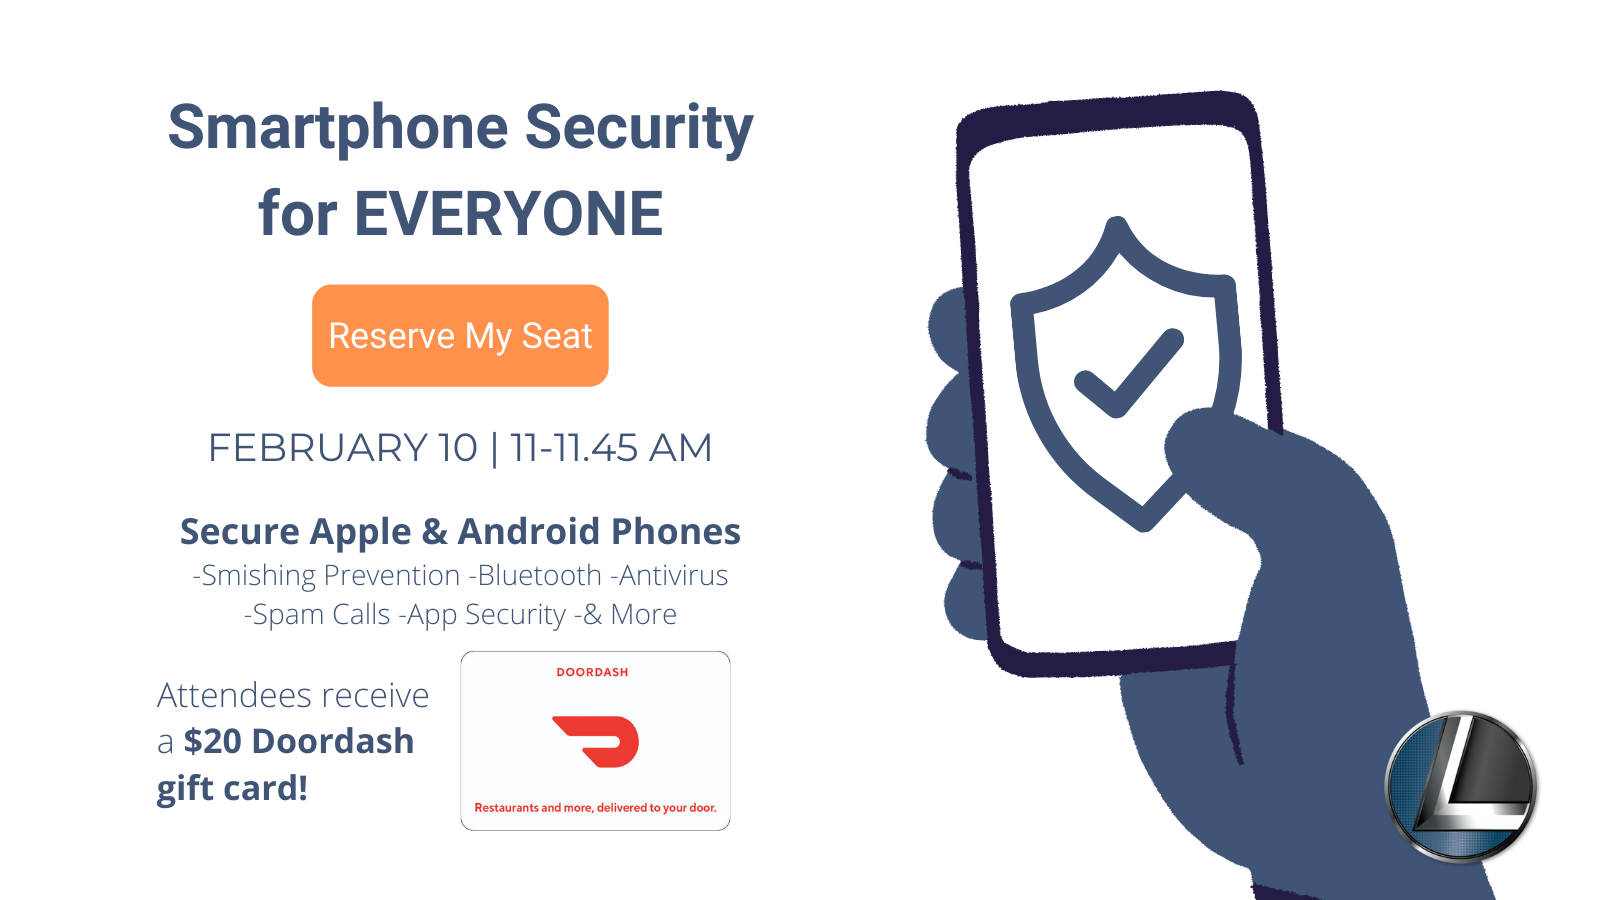 Smartphone Security for EVERYONE (3)